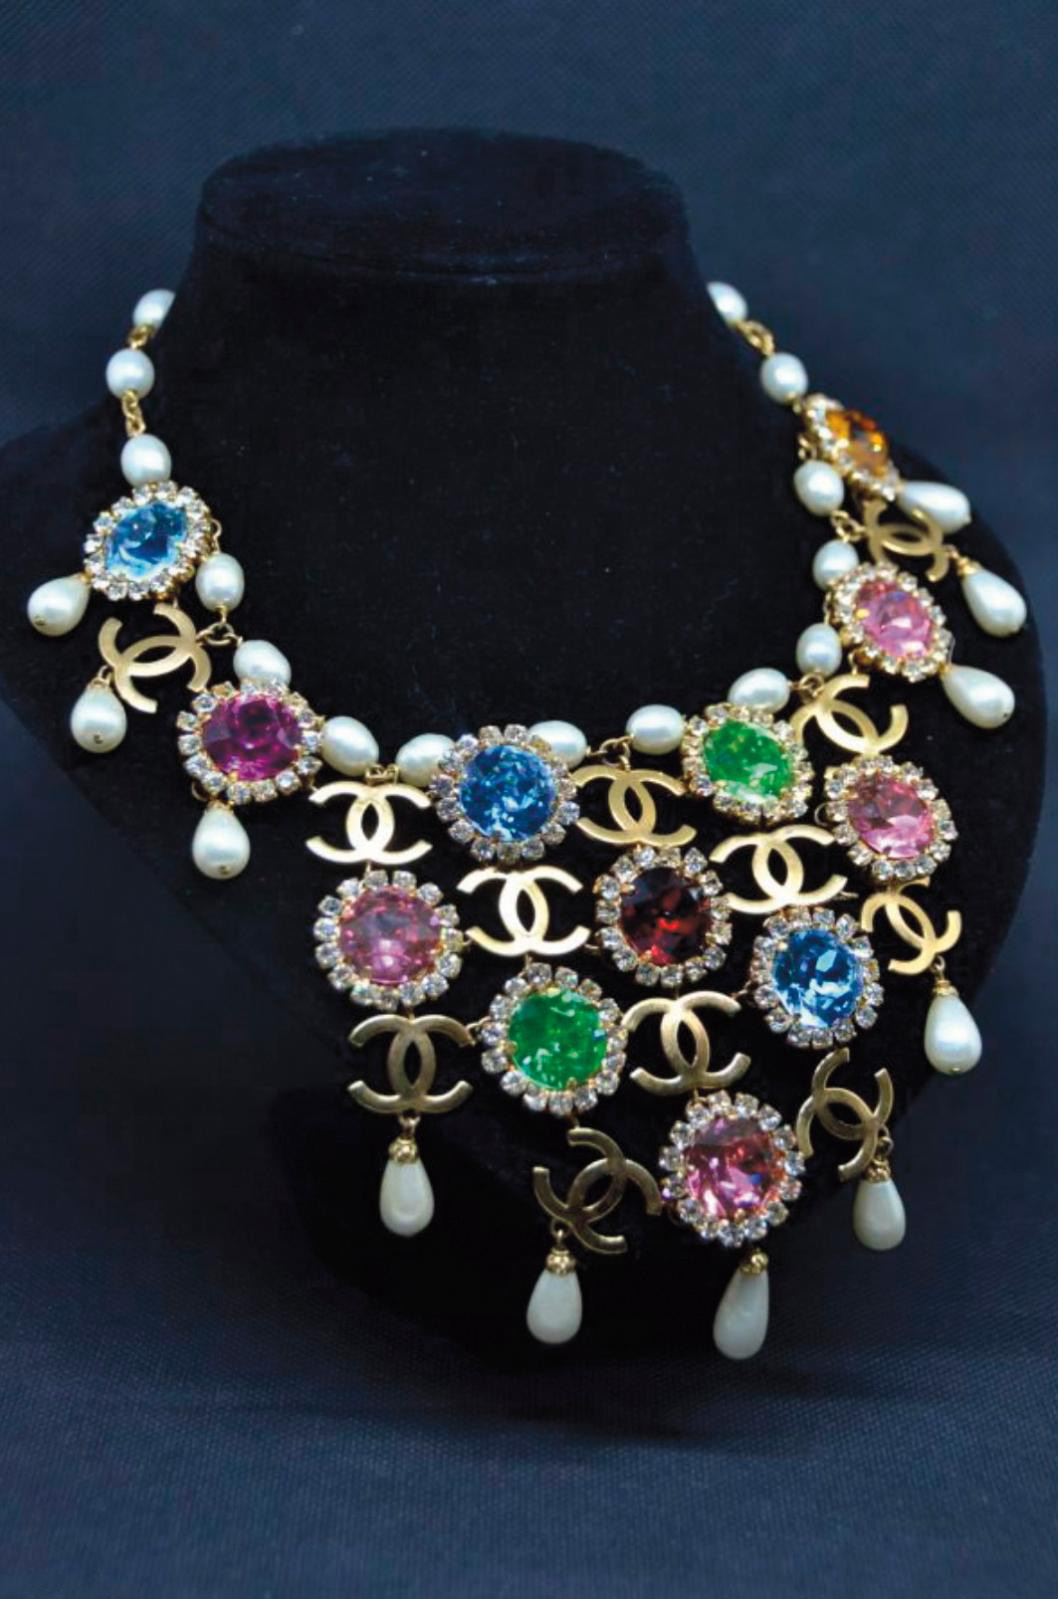 Sold at Auction: Chanel Charm Necklace